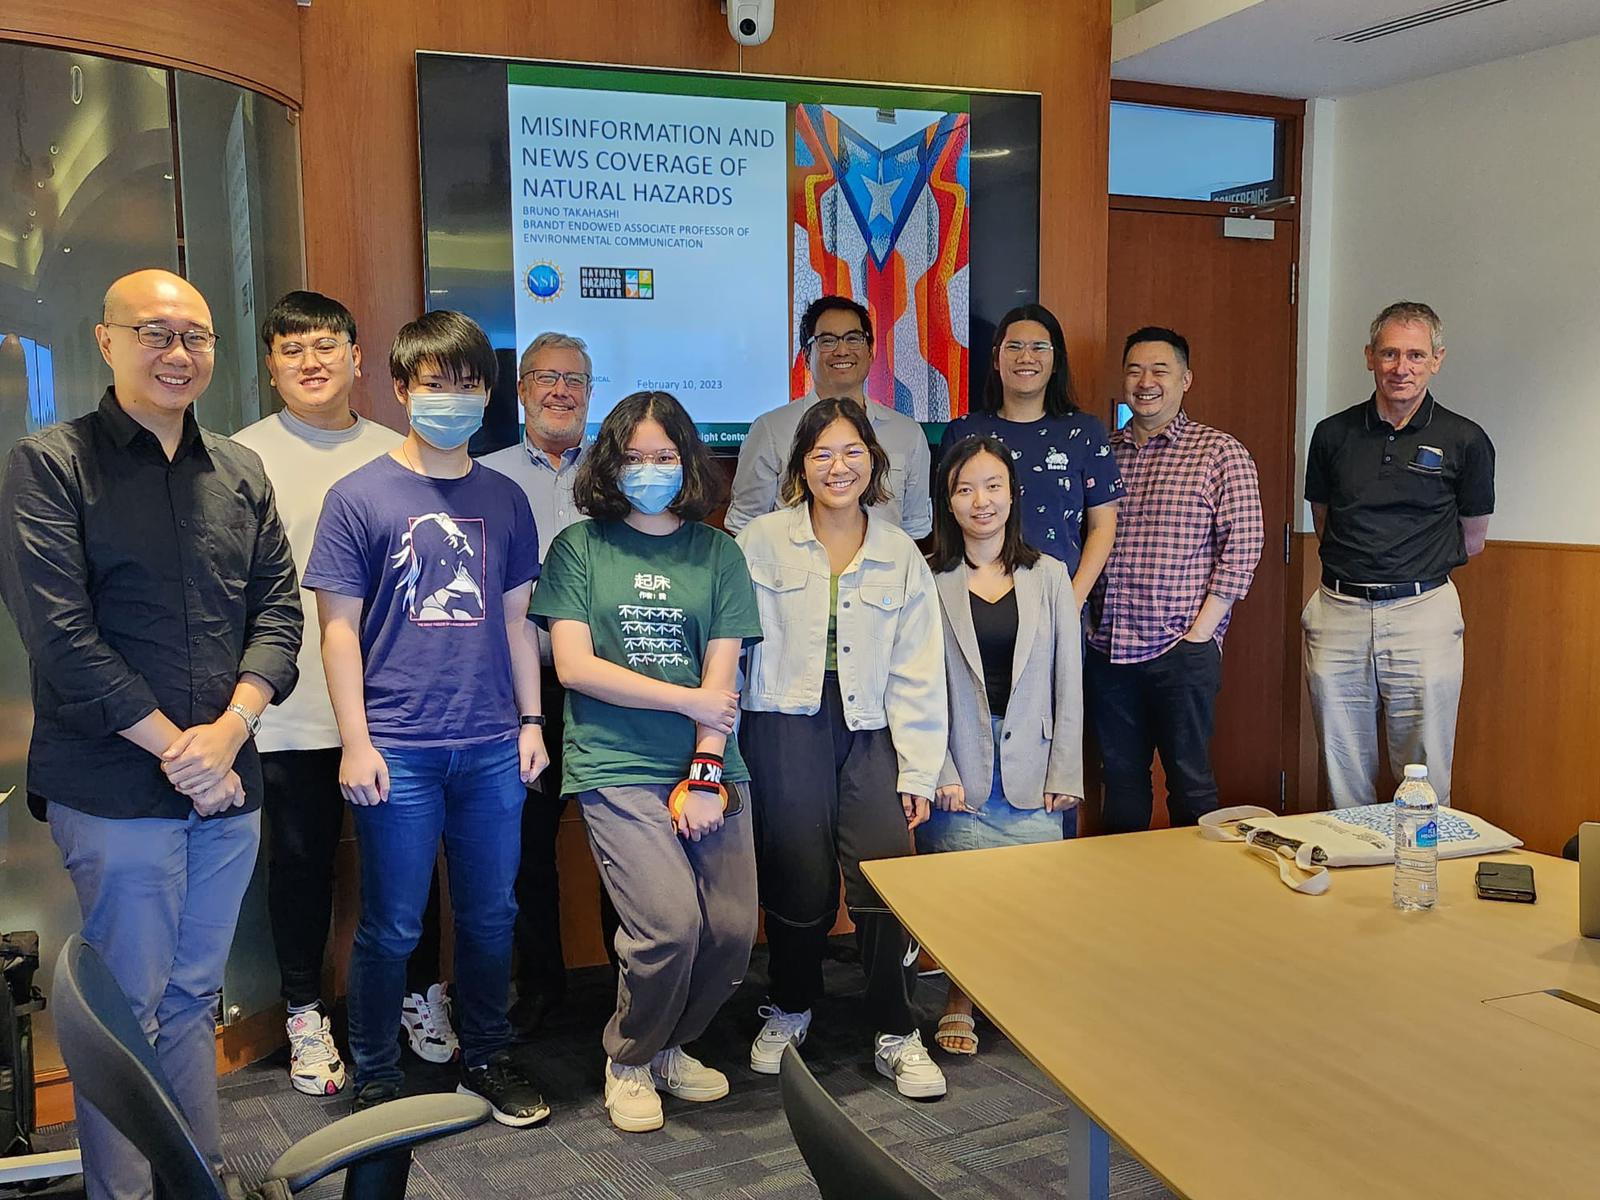 Dr. Takahashi poses with students at Nanyang Technological University following his presentation on misinformation and news coverage of natural hazards. 